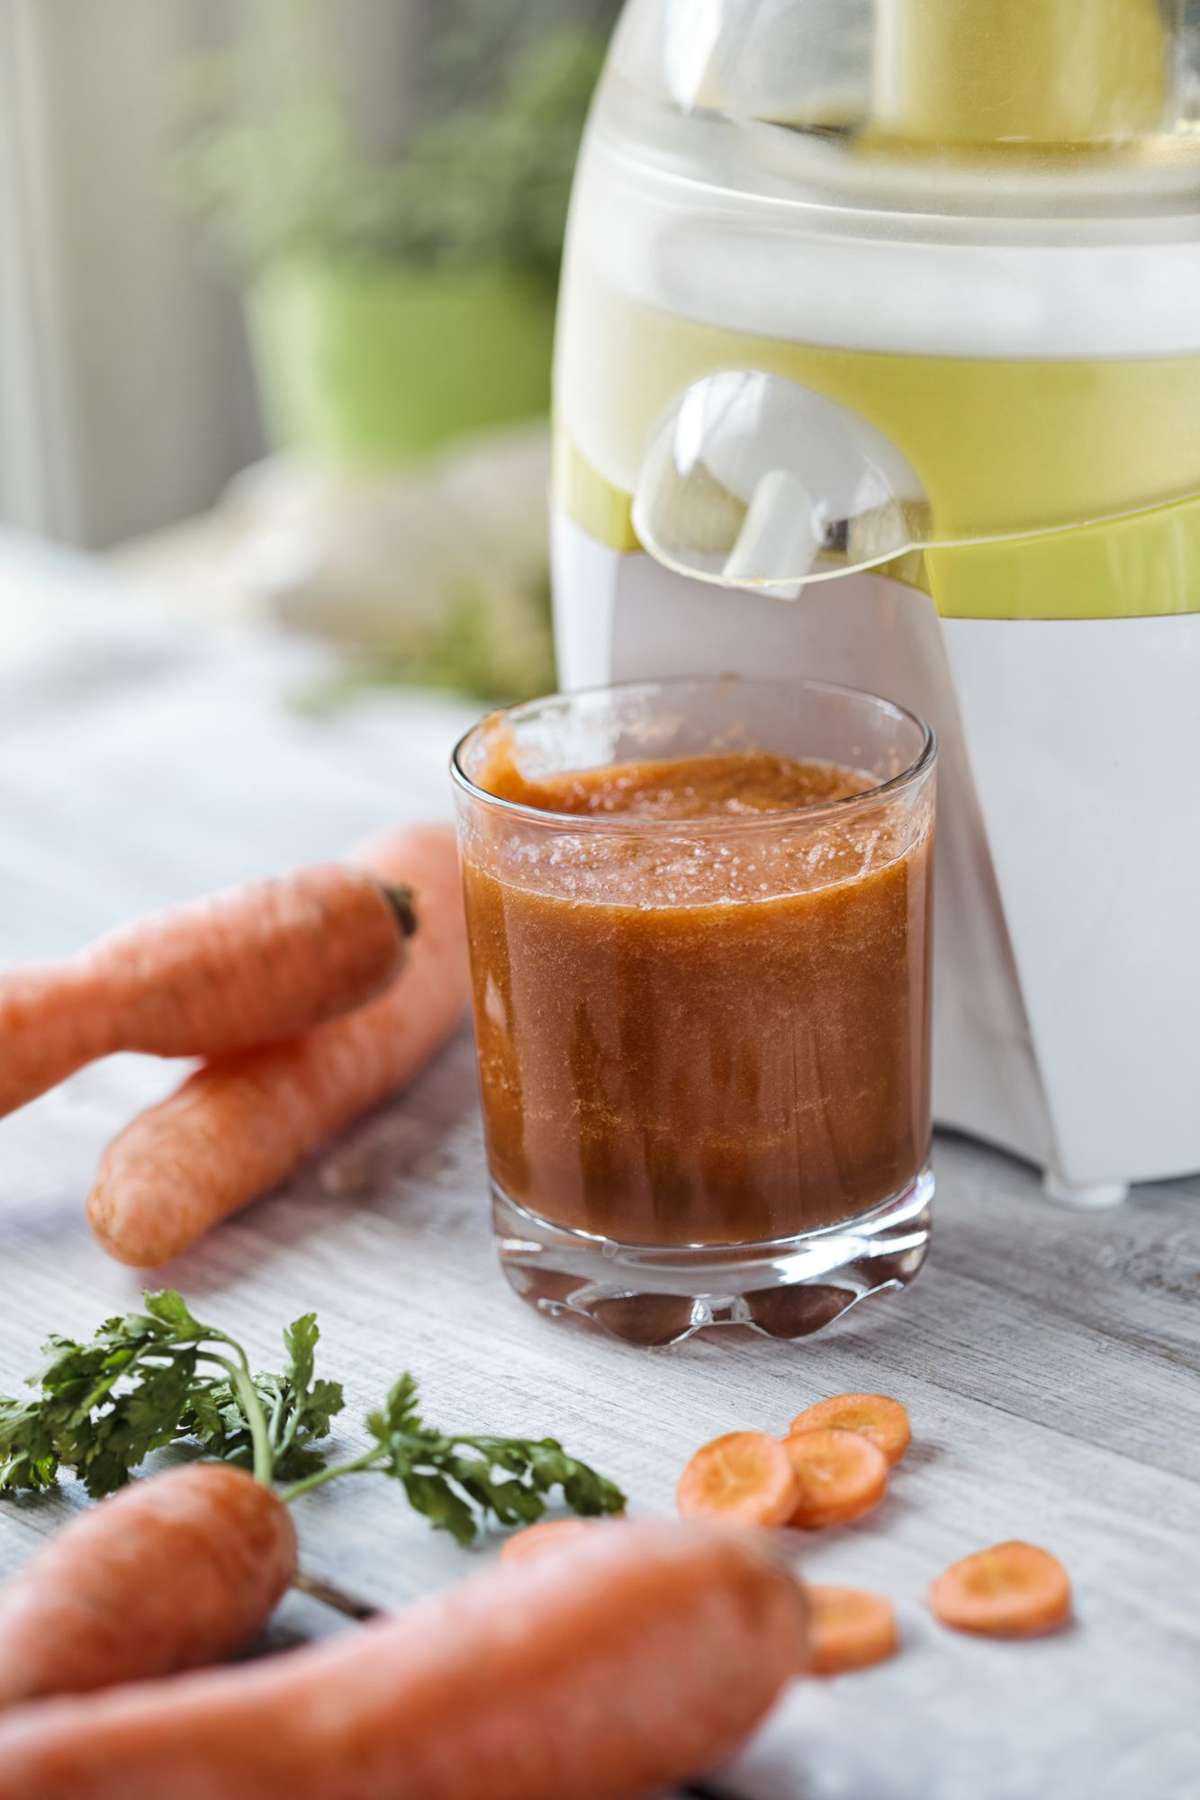 Getting addicted to juicing